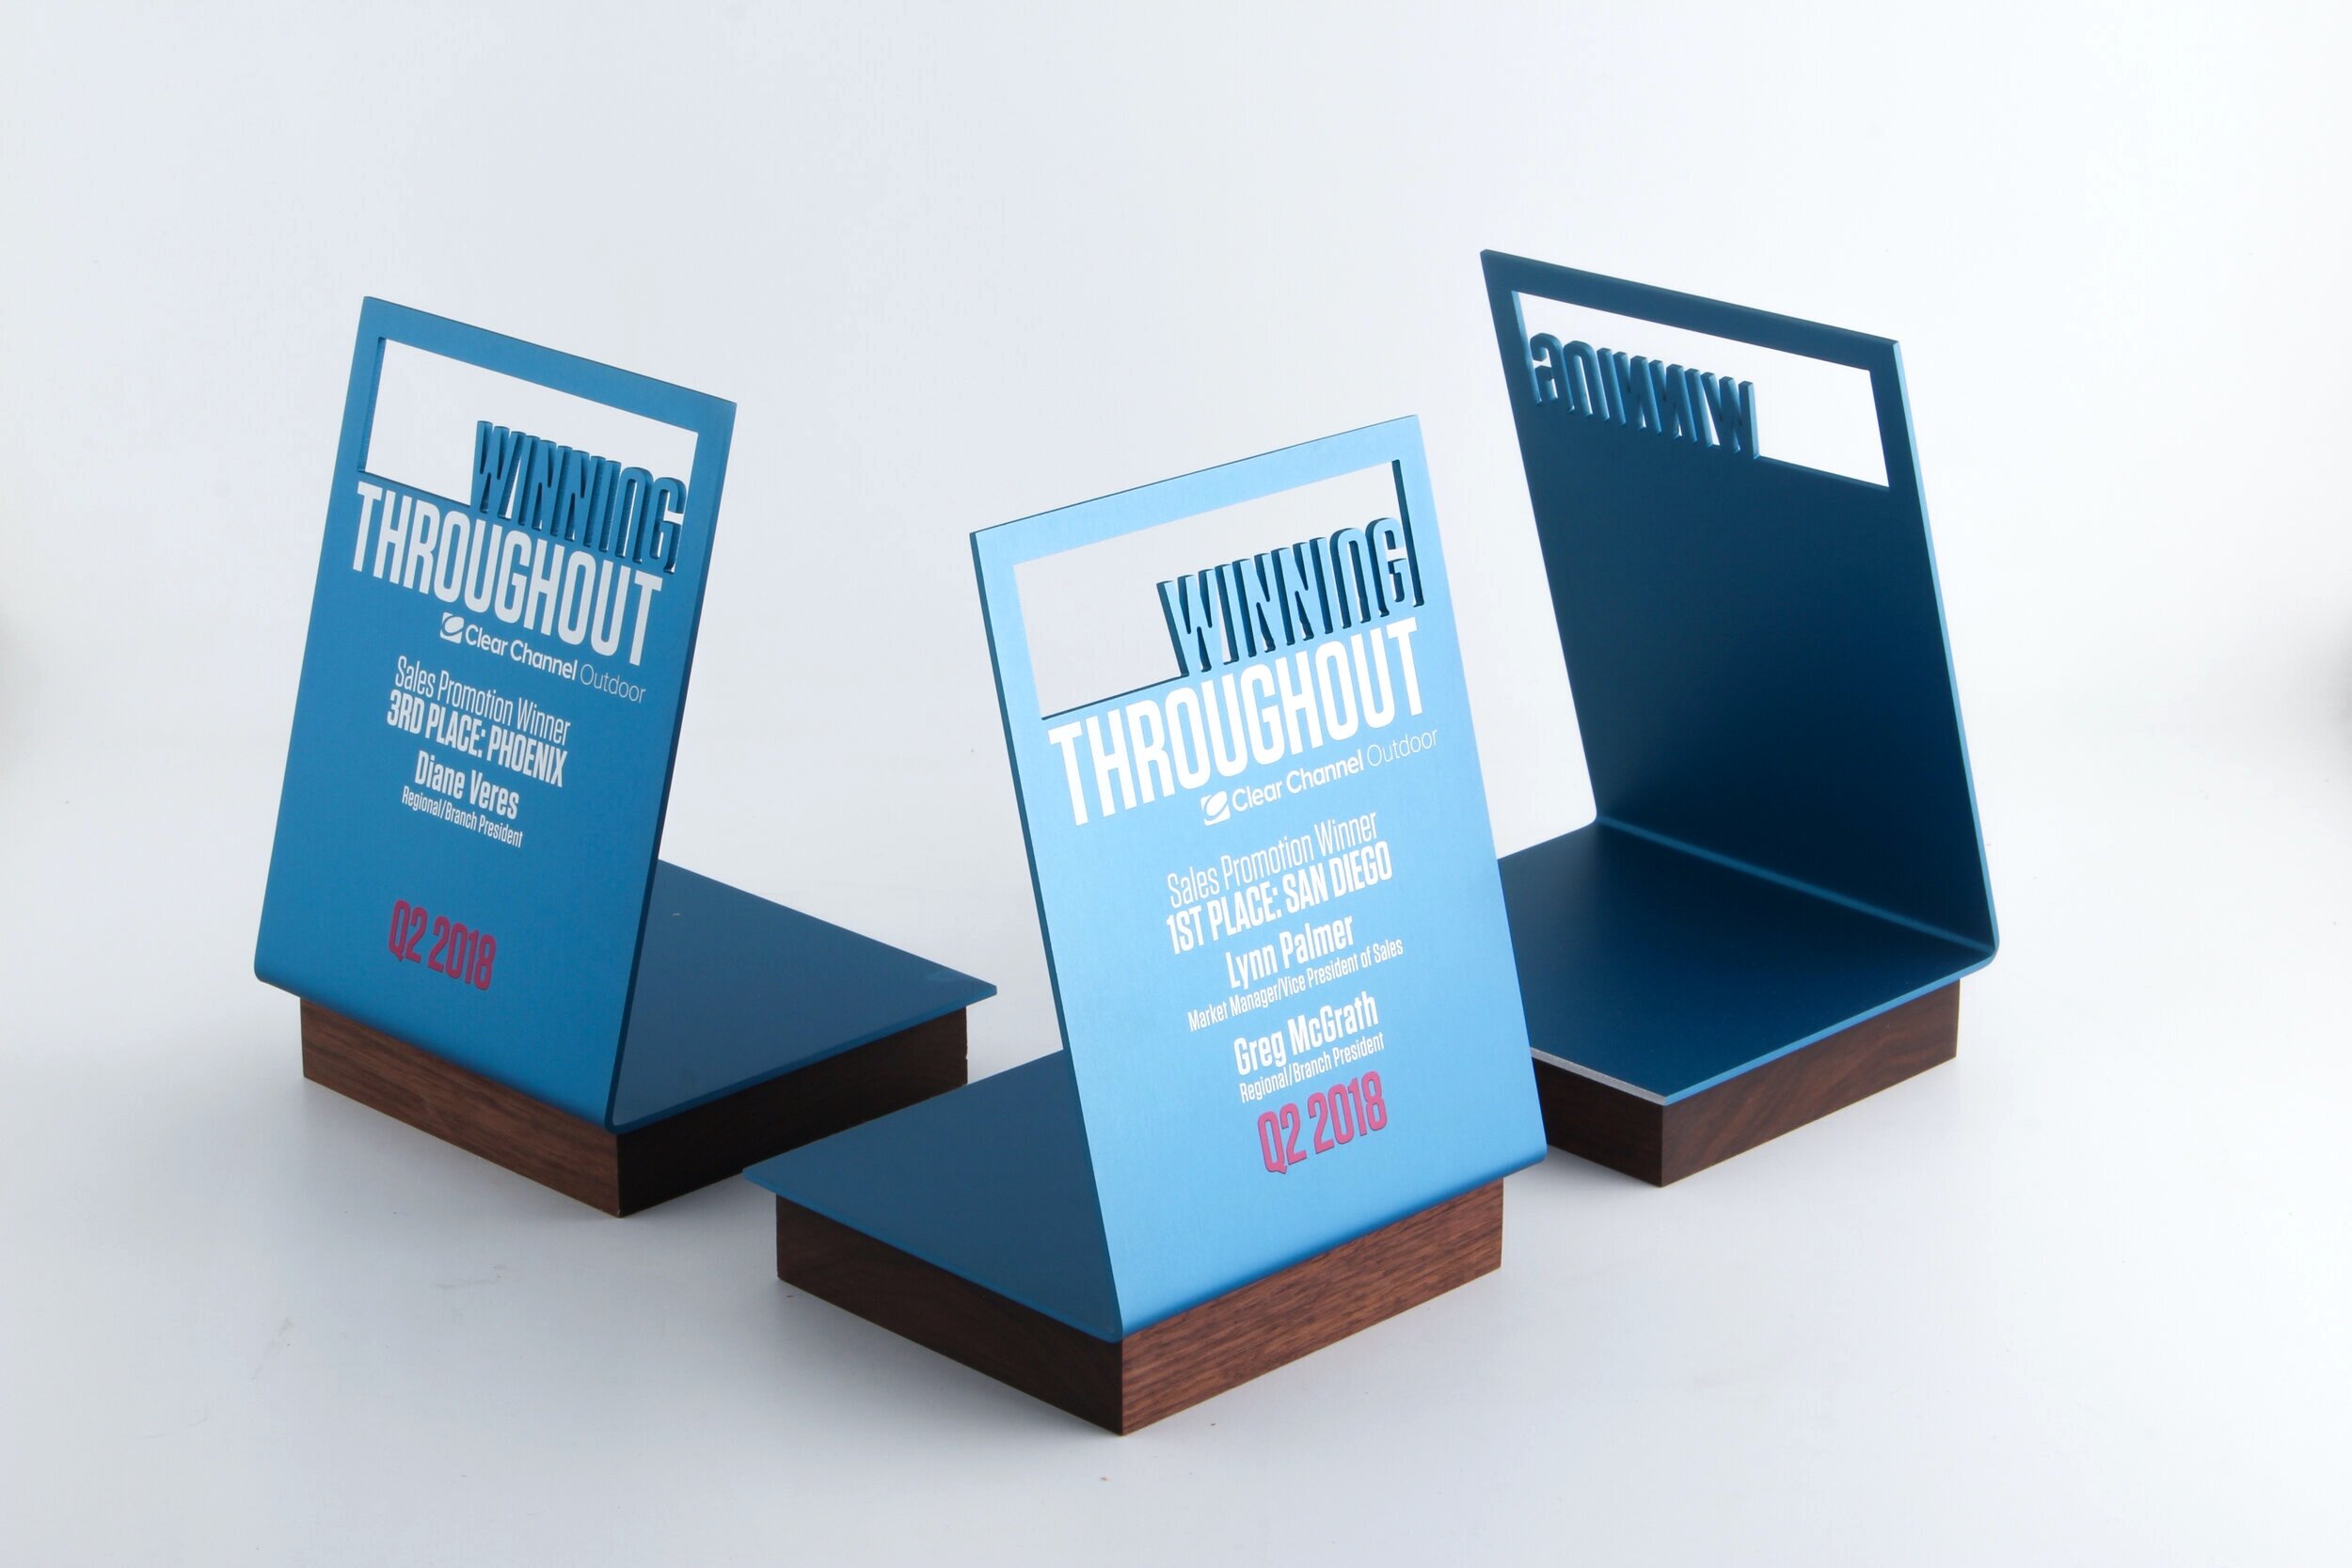 clear channel outdoor advertising awards winning